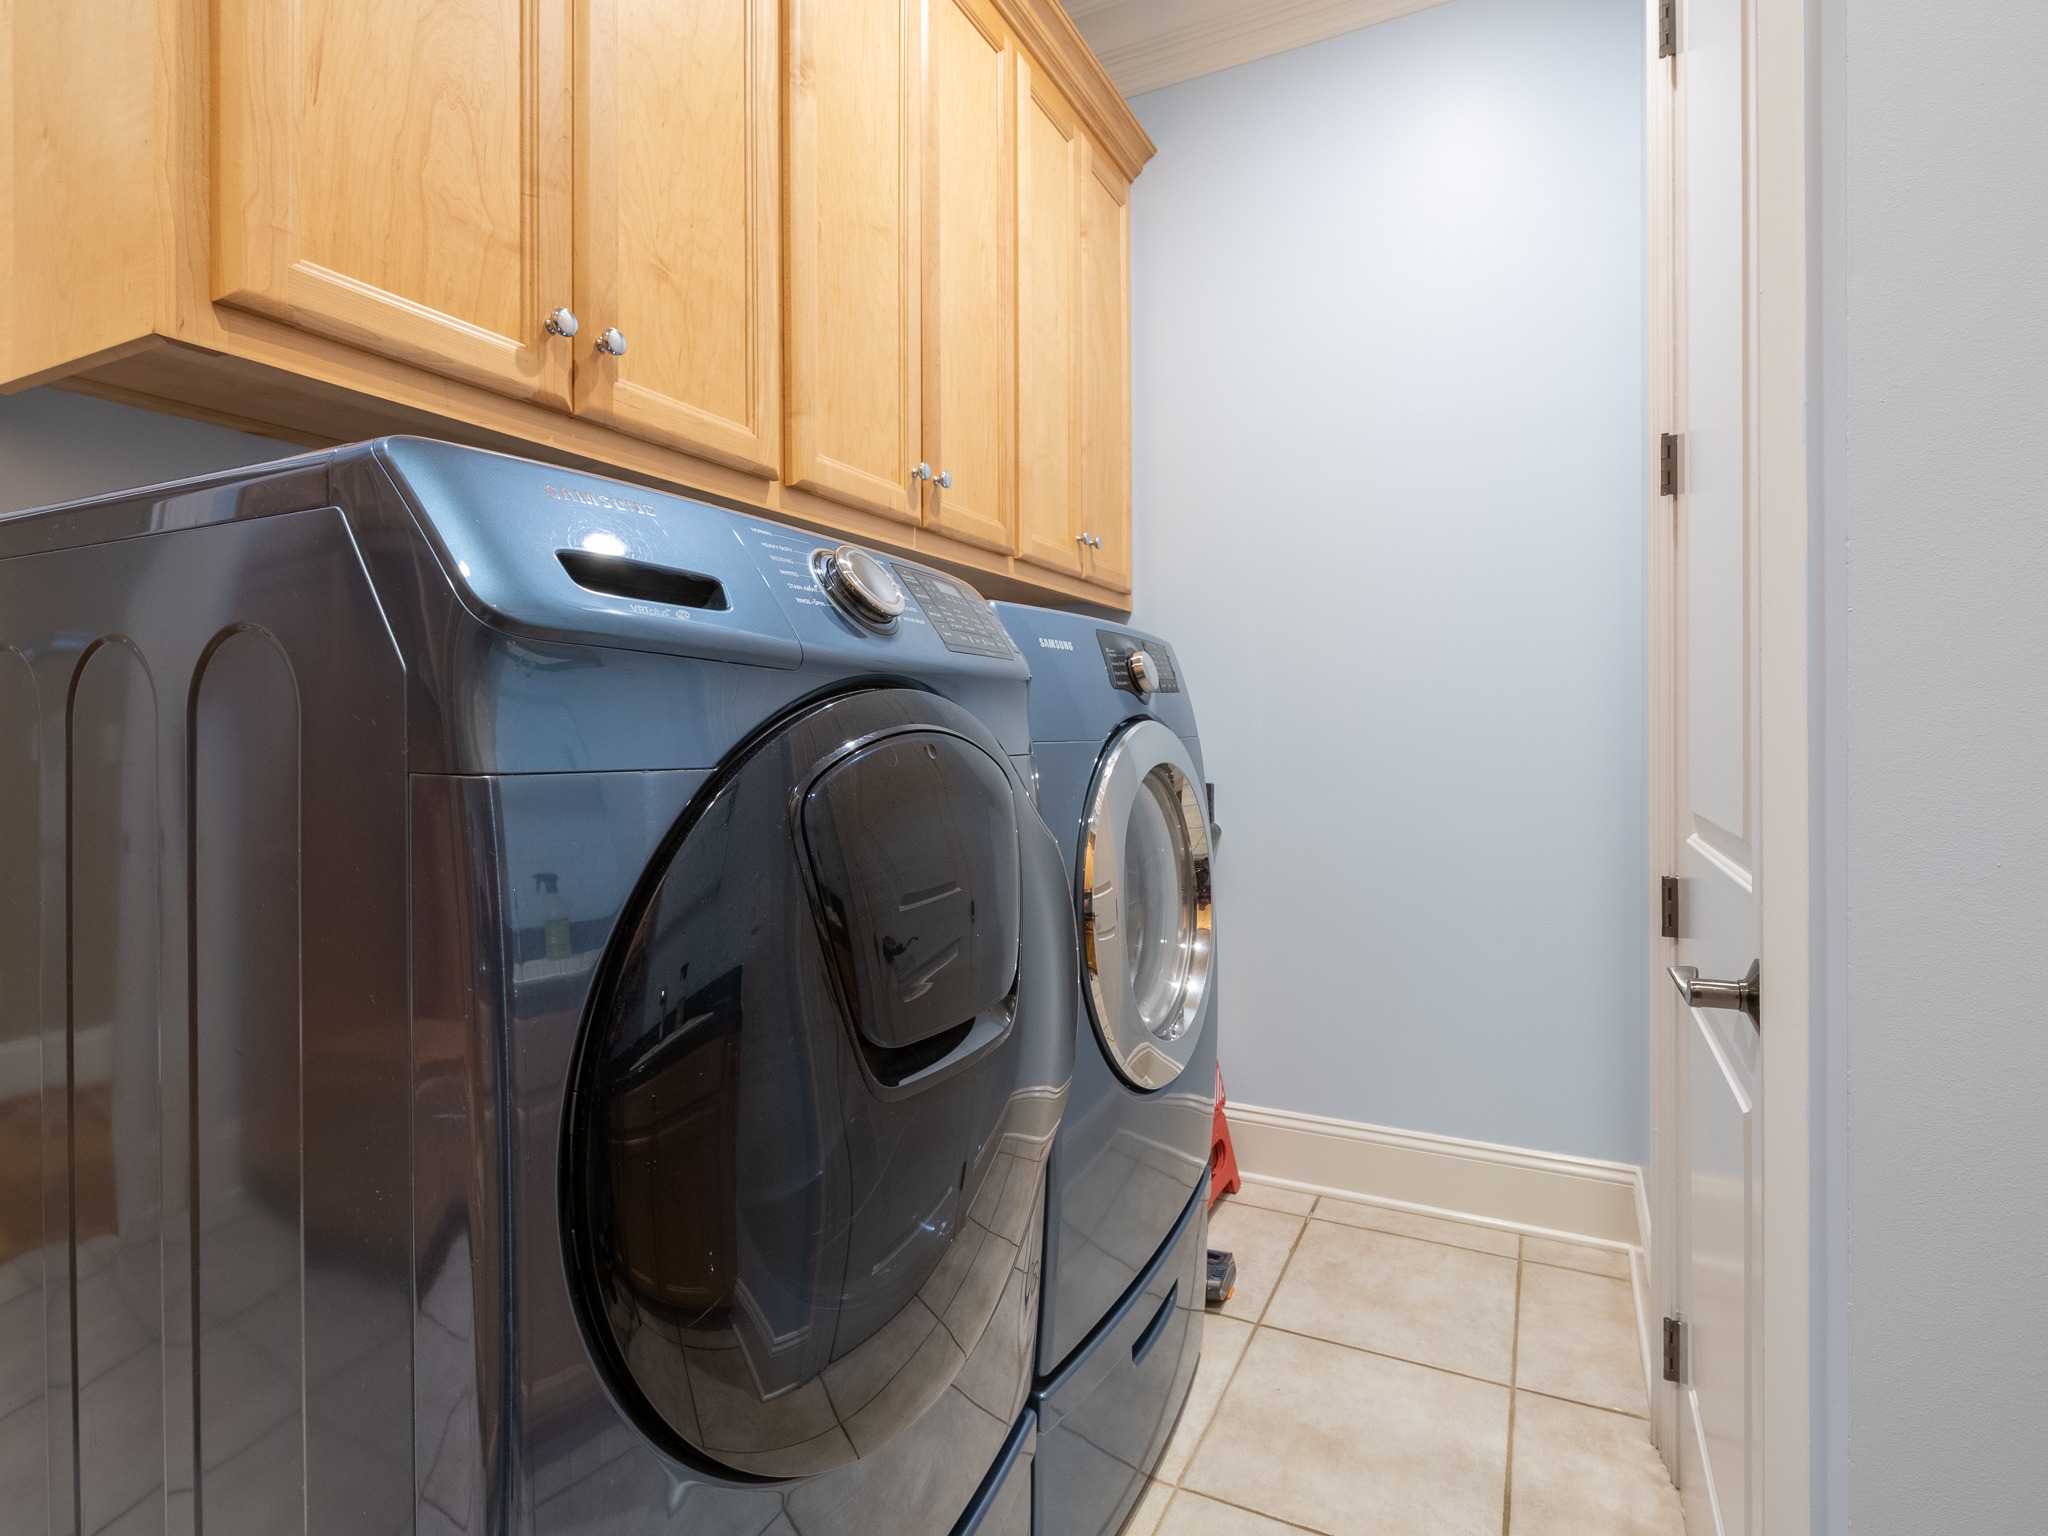 Laundry on main level, washer and dryer to remain